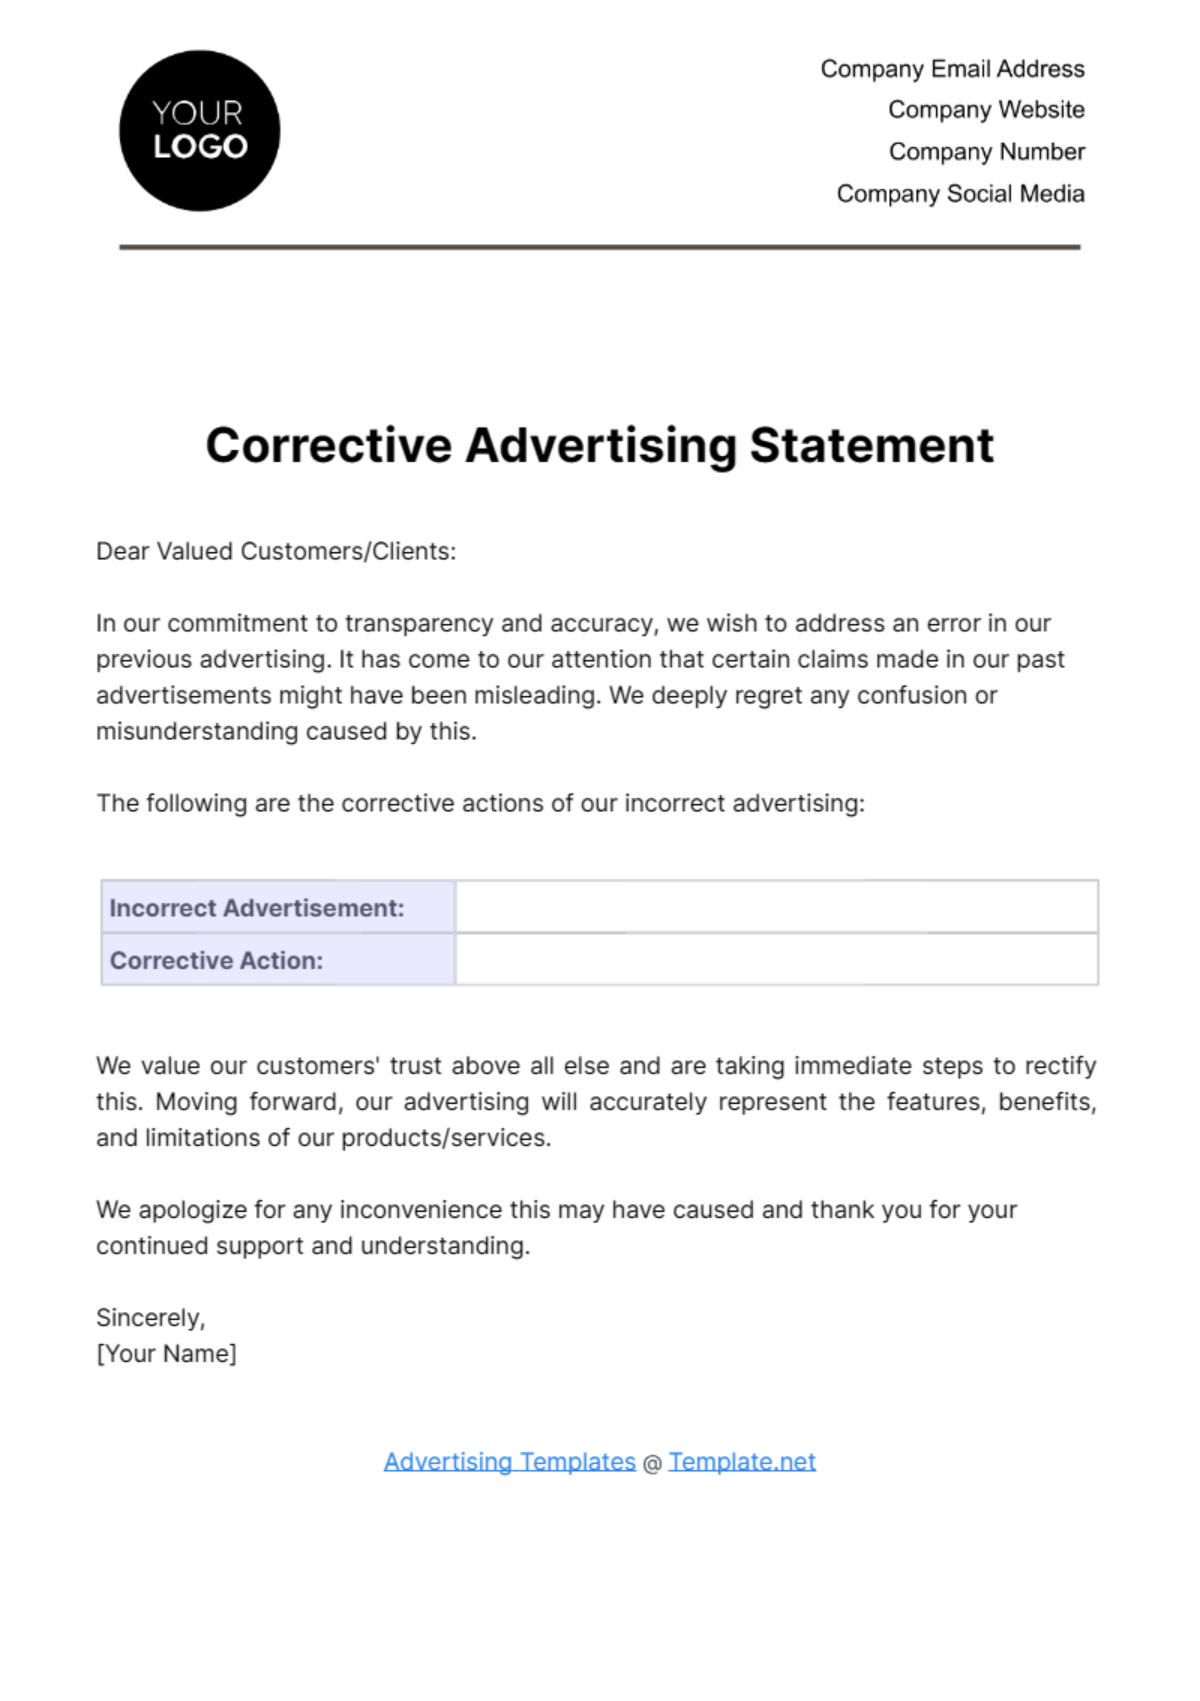 Free Corrective Advertising Statement Template